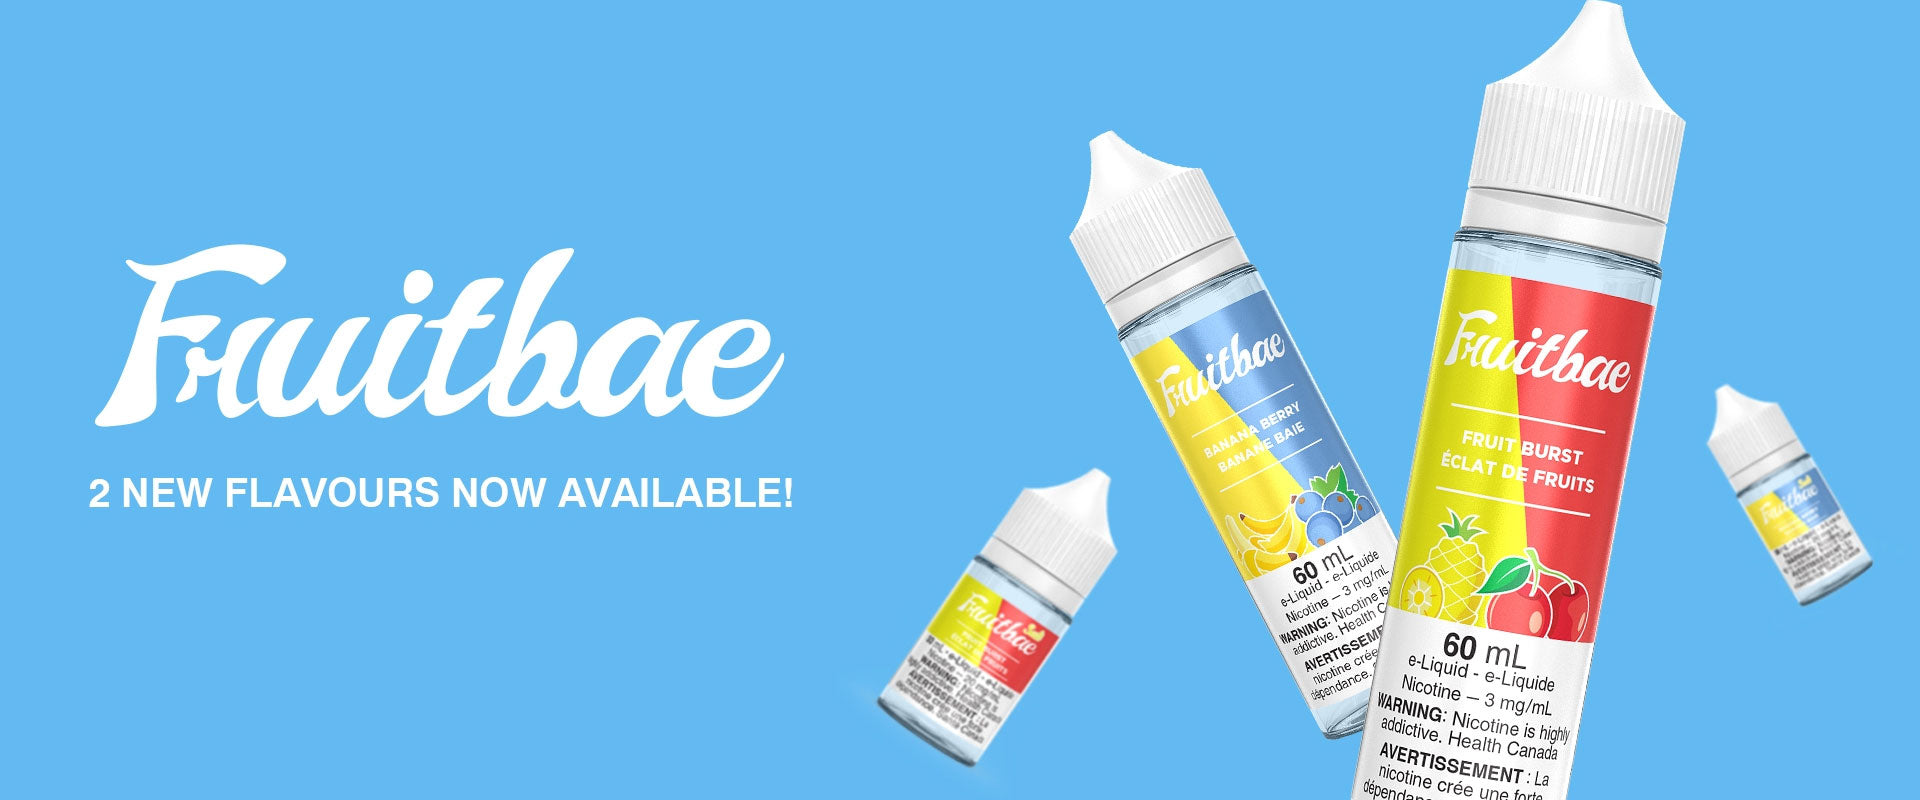 Fruitbae 2 New Flavours